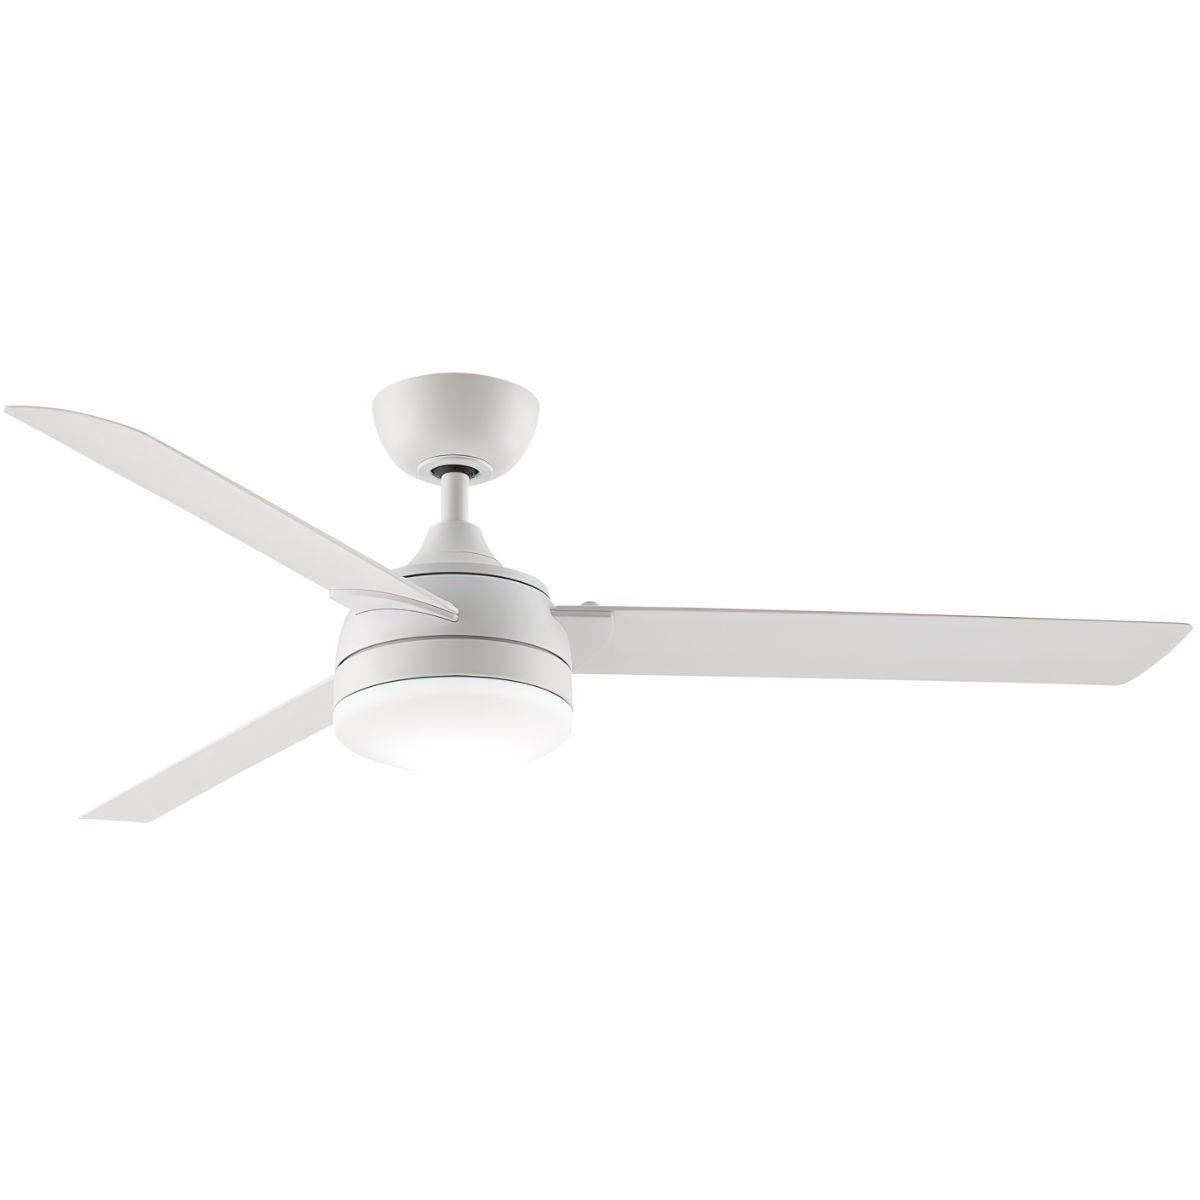 Xeno 56 Inch Large Modern Outdoor Ceiling Fan With Light And Remote, Wet Rated